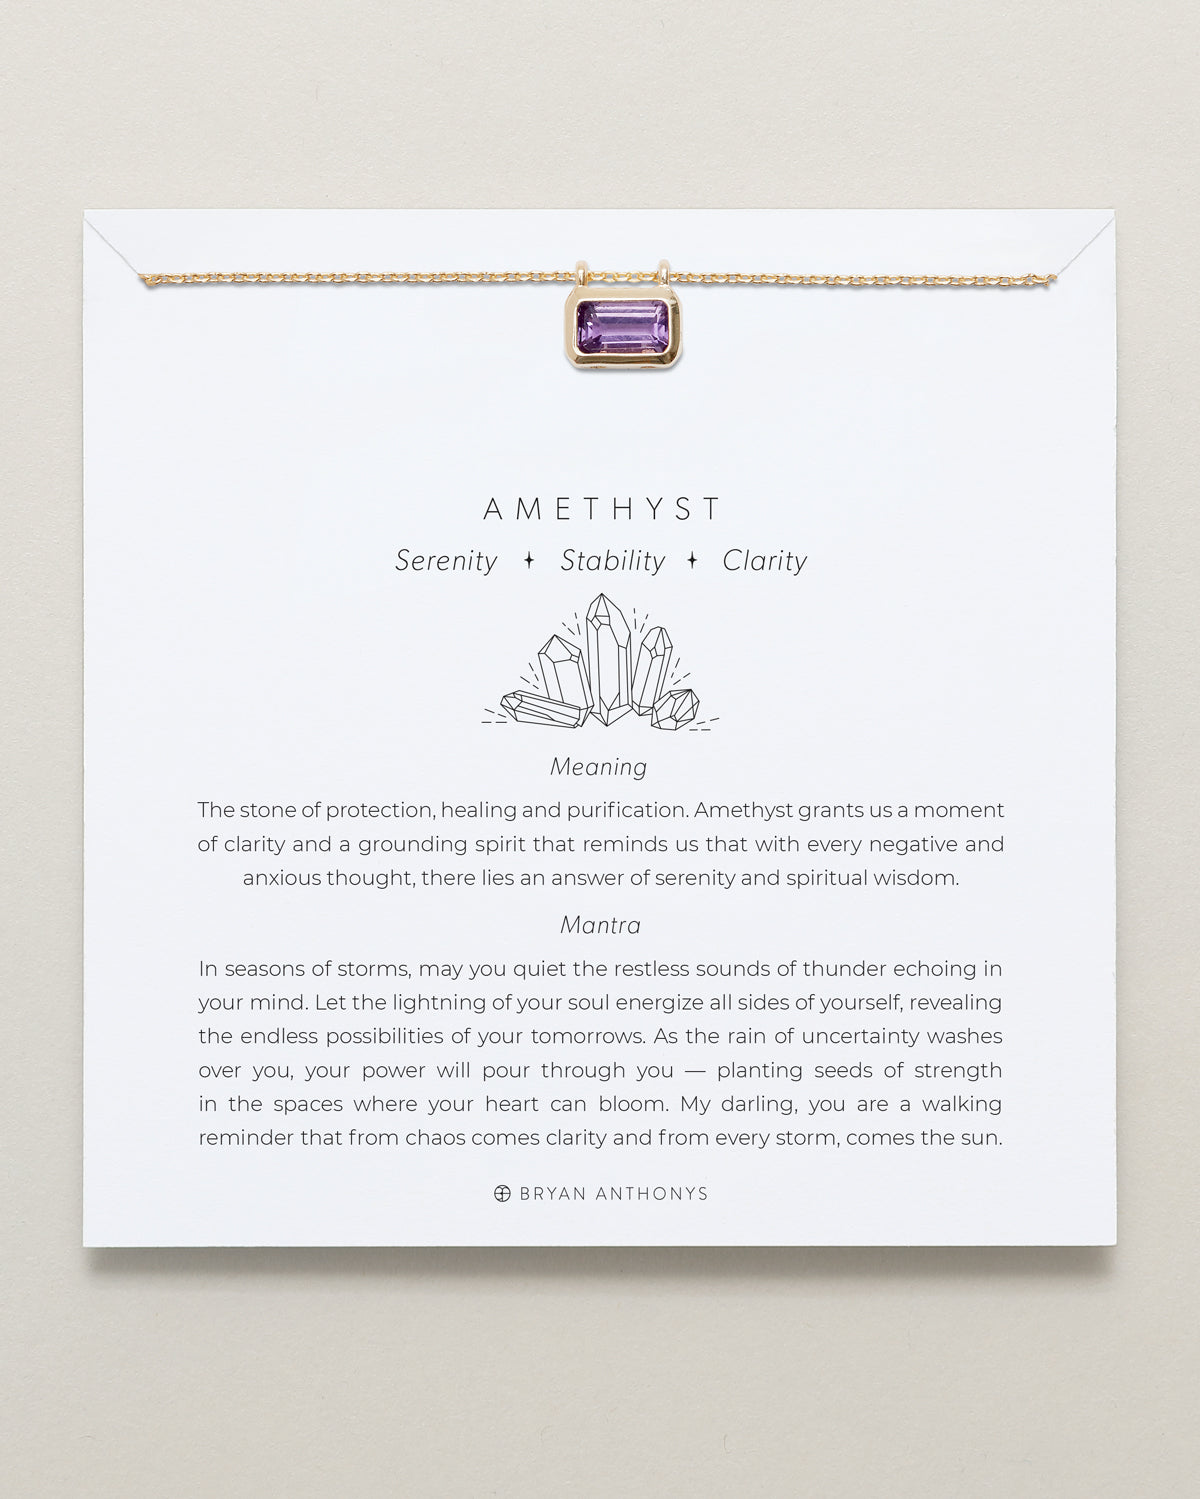 Bryan Anthonys Amethyst Healing Stone Gold Pendant Necklace On Card